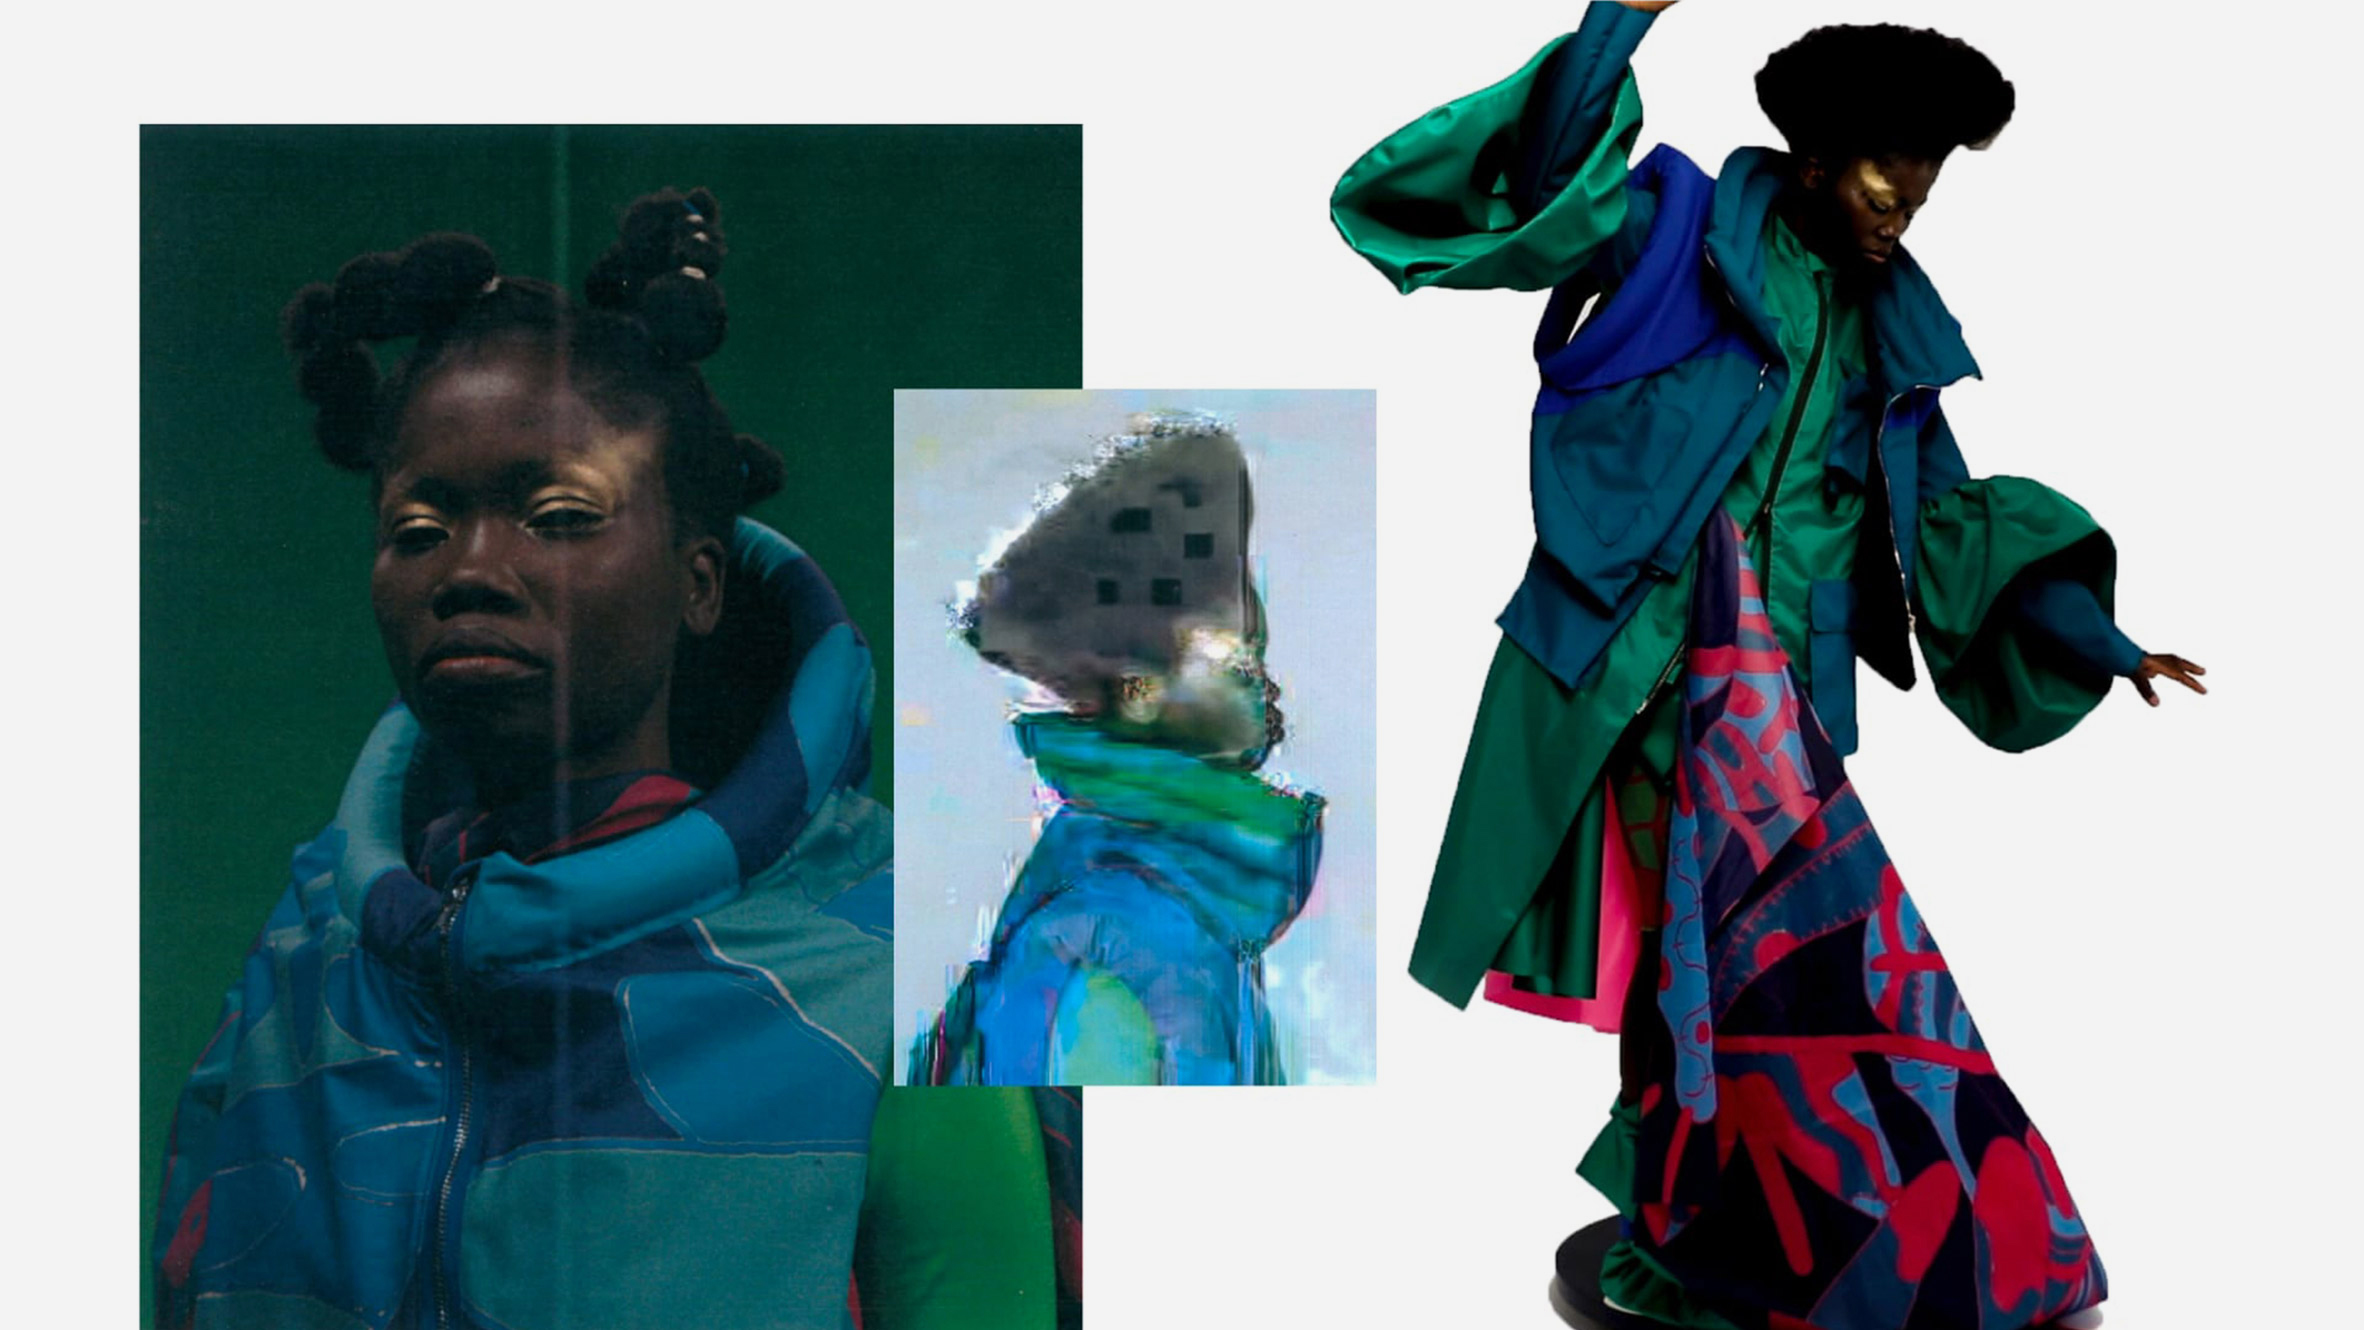 Collage of three photos of a fashion model wearing oversized jewel-toned clothing